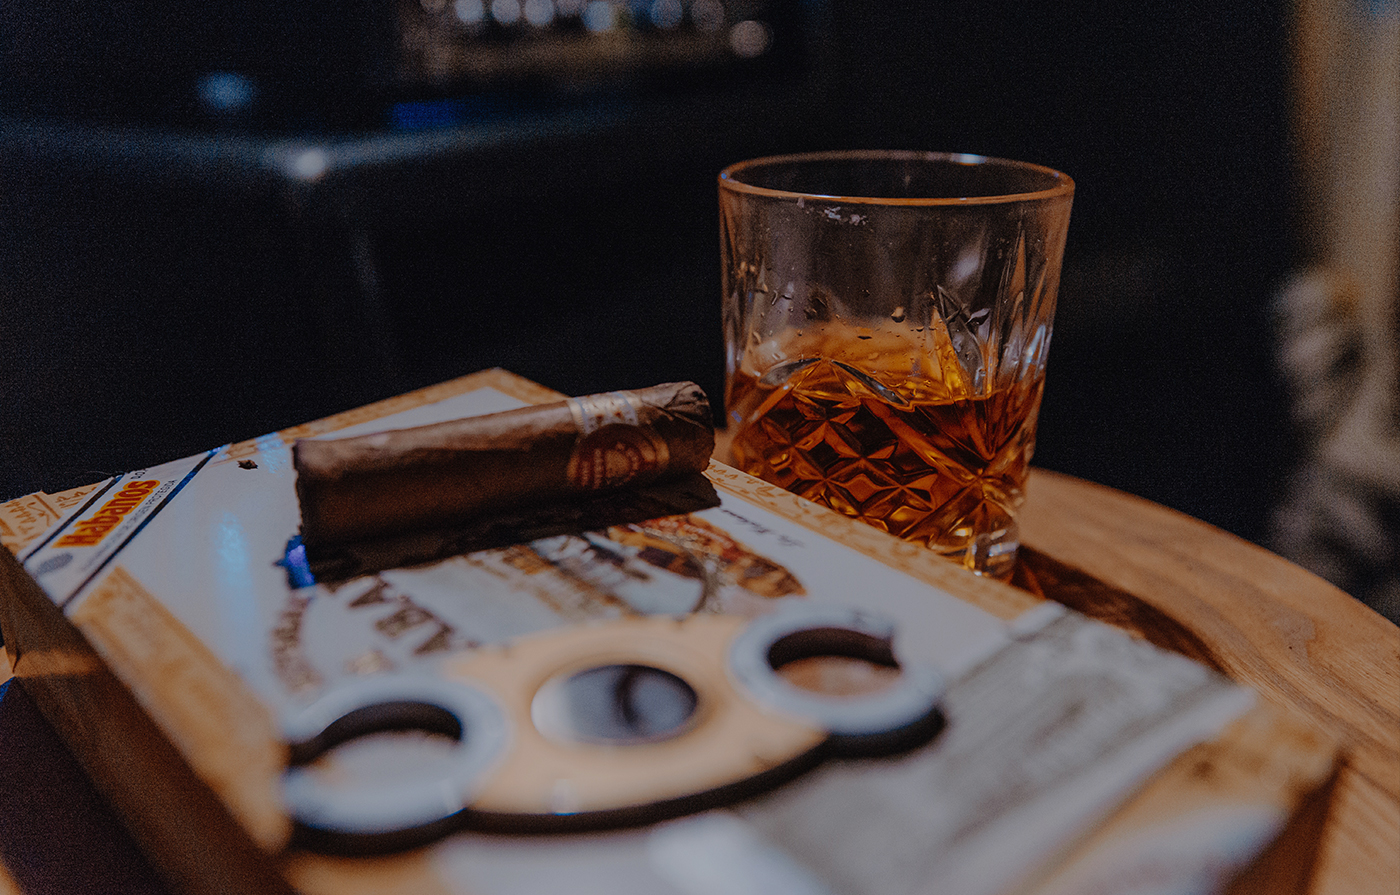 Playing poker with whiskey and cigars on table